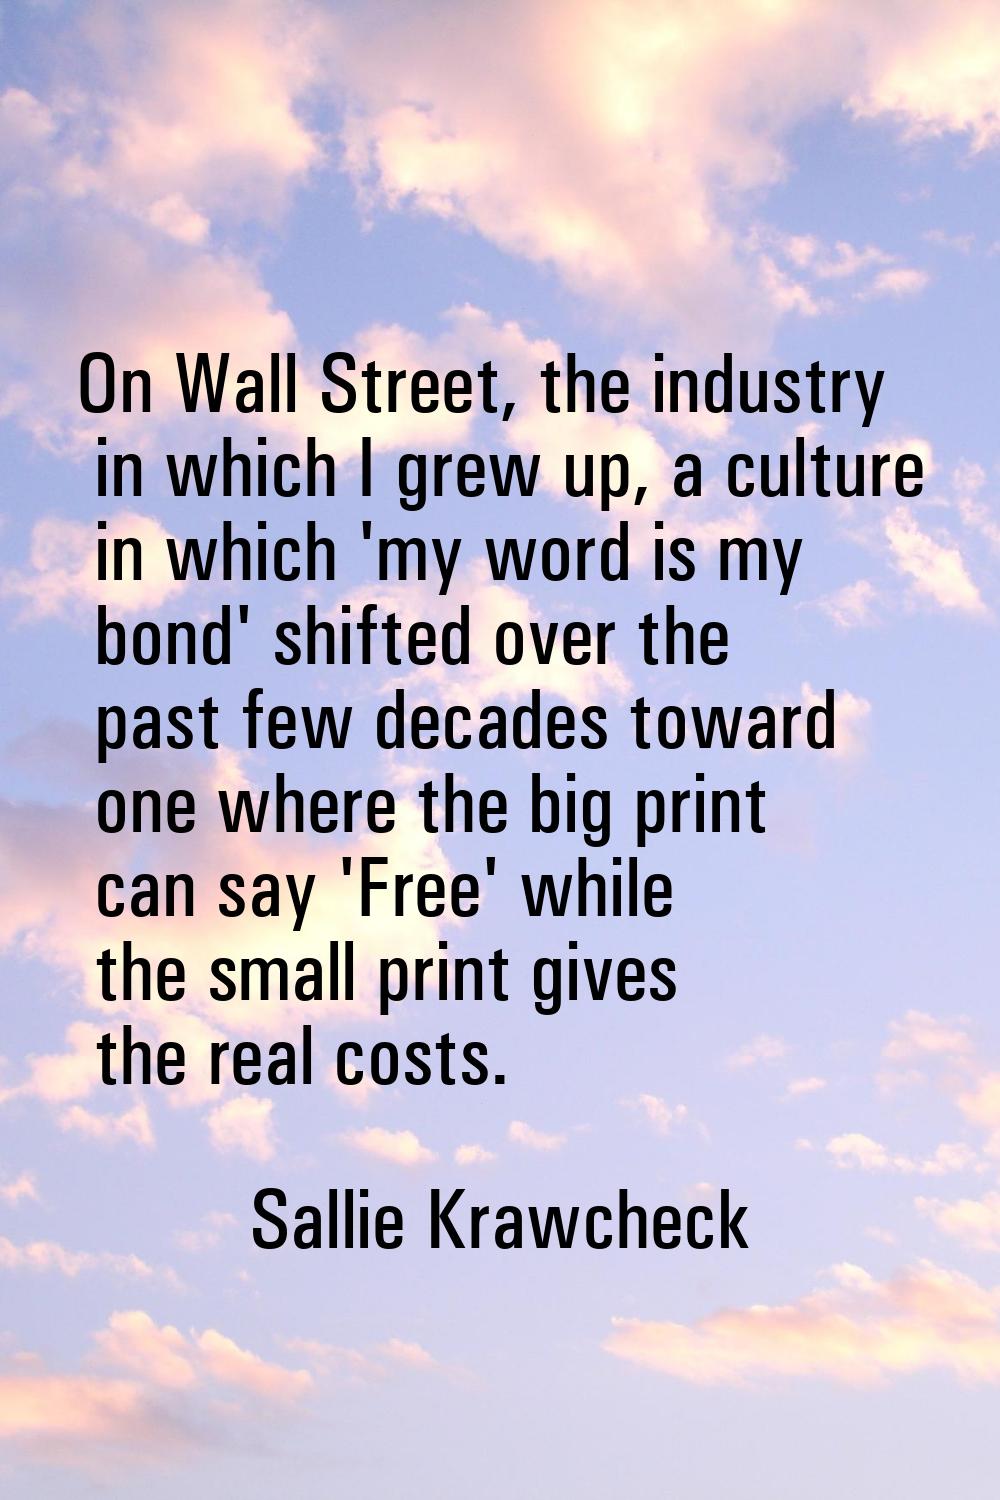 On Wall Street, the industry in which I grew up, a culture in which 'my word is my bond' shifted ov